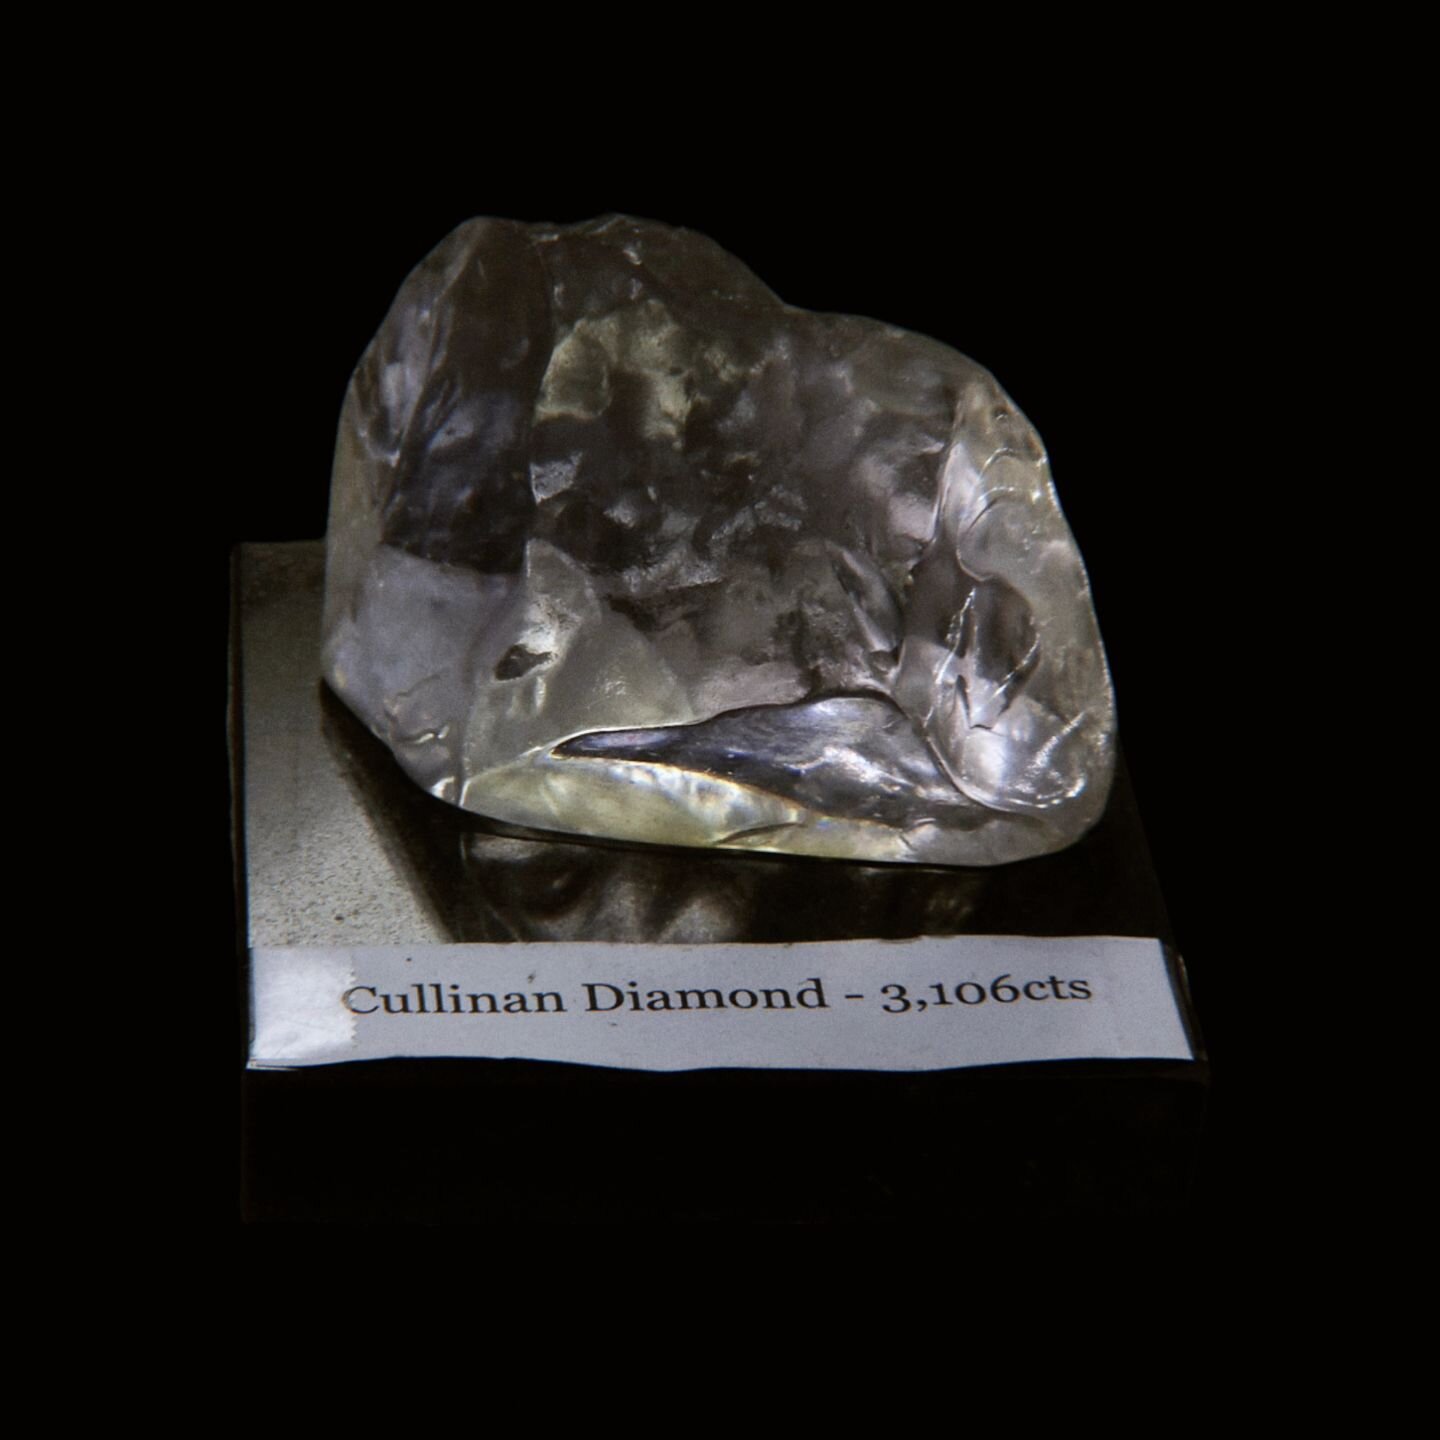 It's the month of diamonds and we have a copy of the biggest diamond in the world! This is only half! The other half broke off sometime before it was discovered and broke apart in the mining process. The Cullinan Diamond is the largest rough diamond 